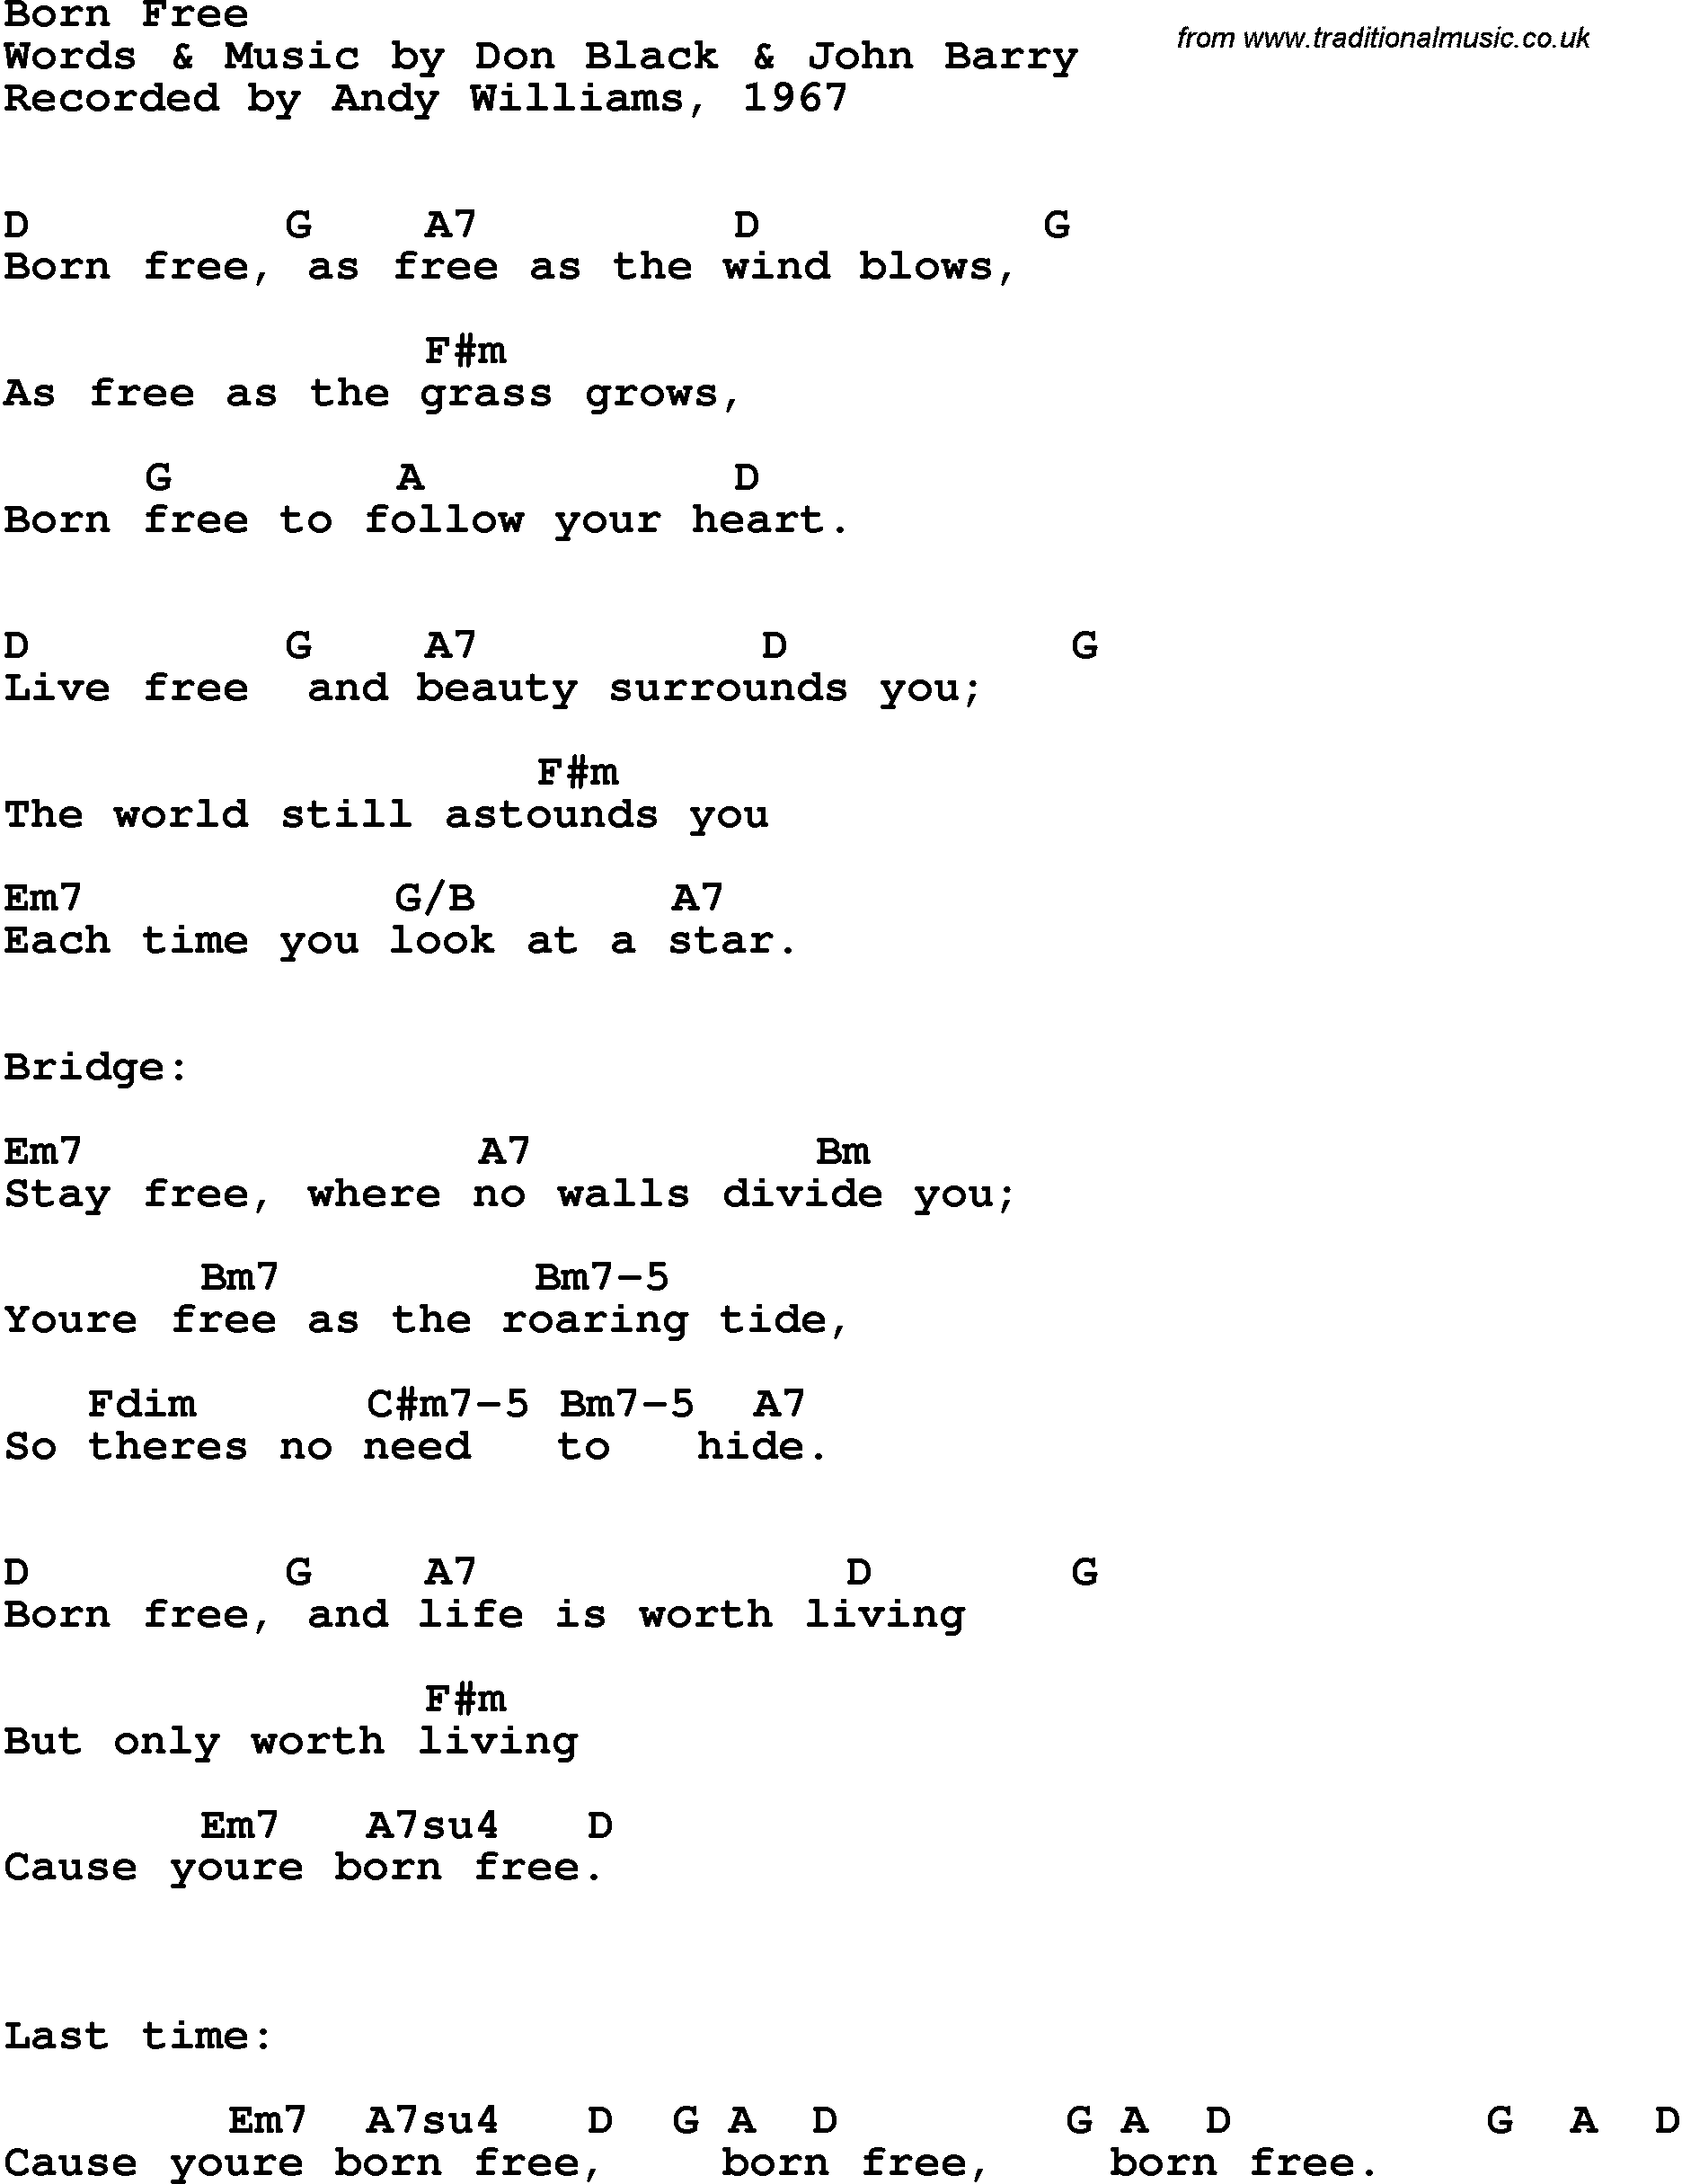 Song Lyrics with guitar chords for Born Free - Andy Williams, 1967